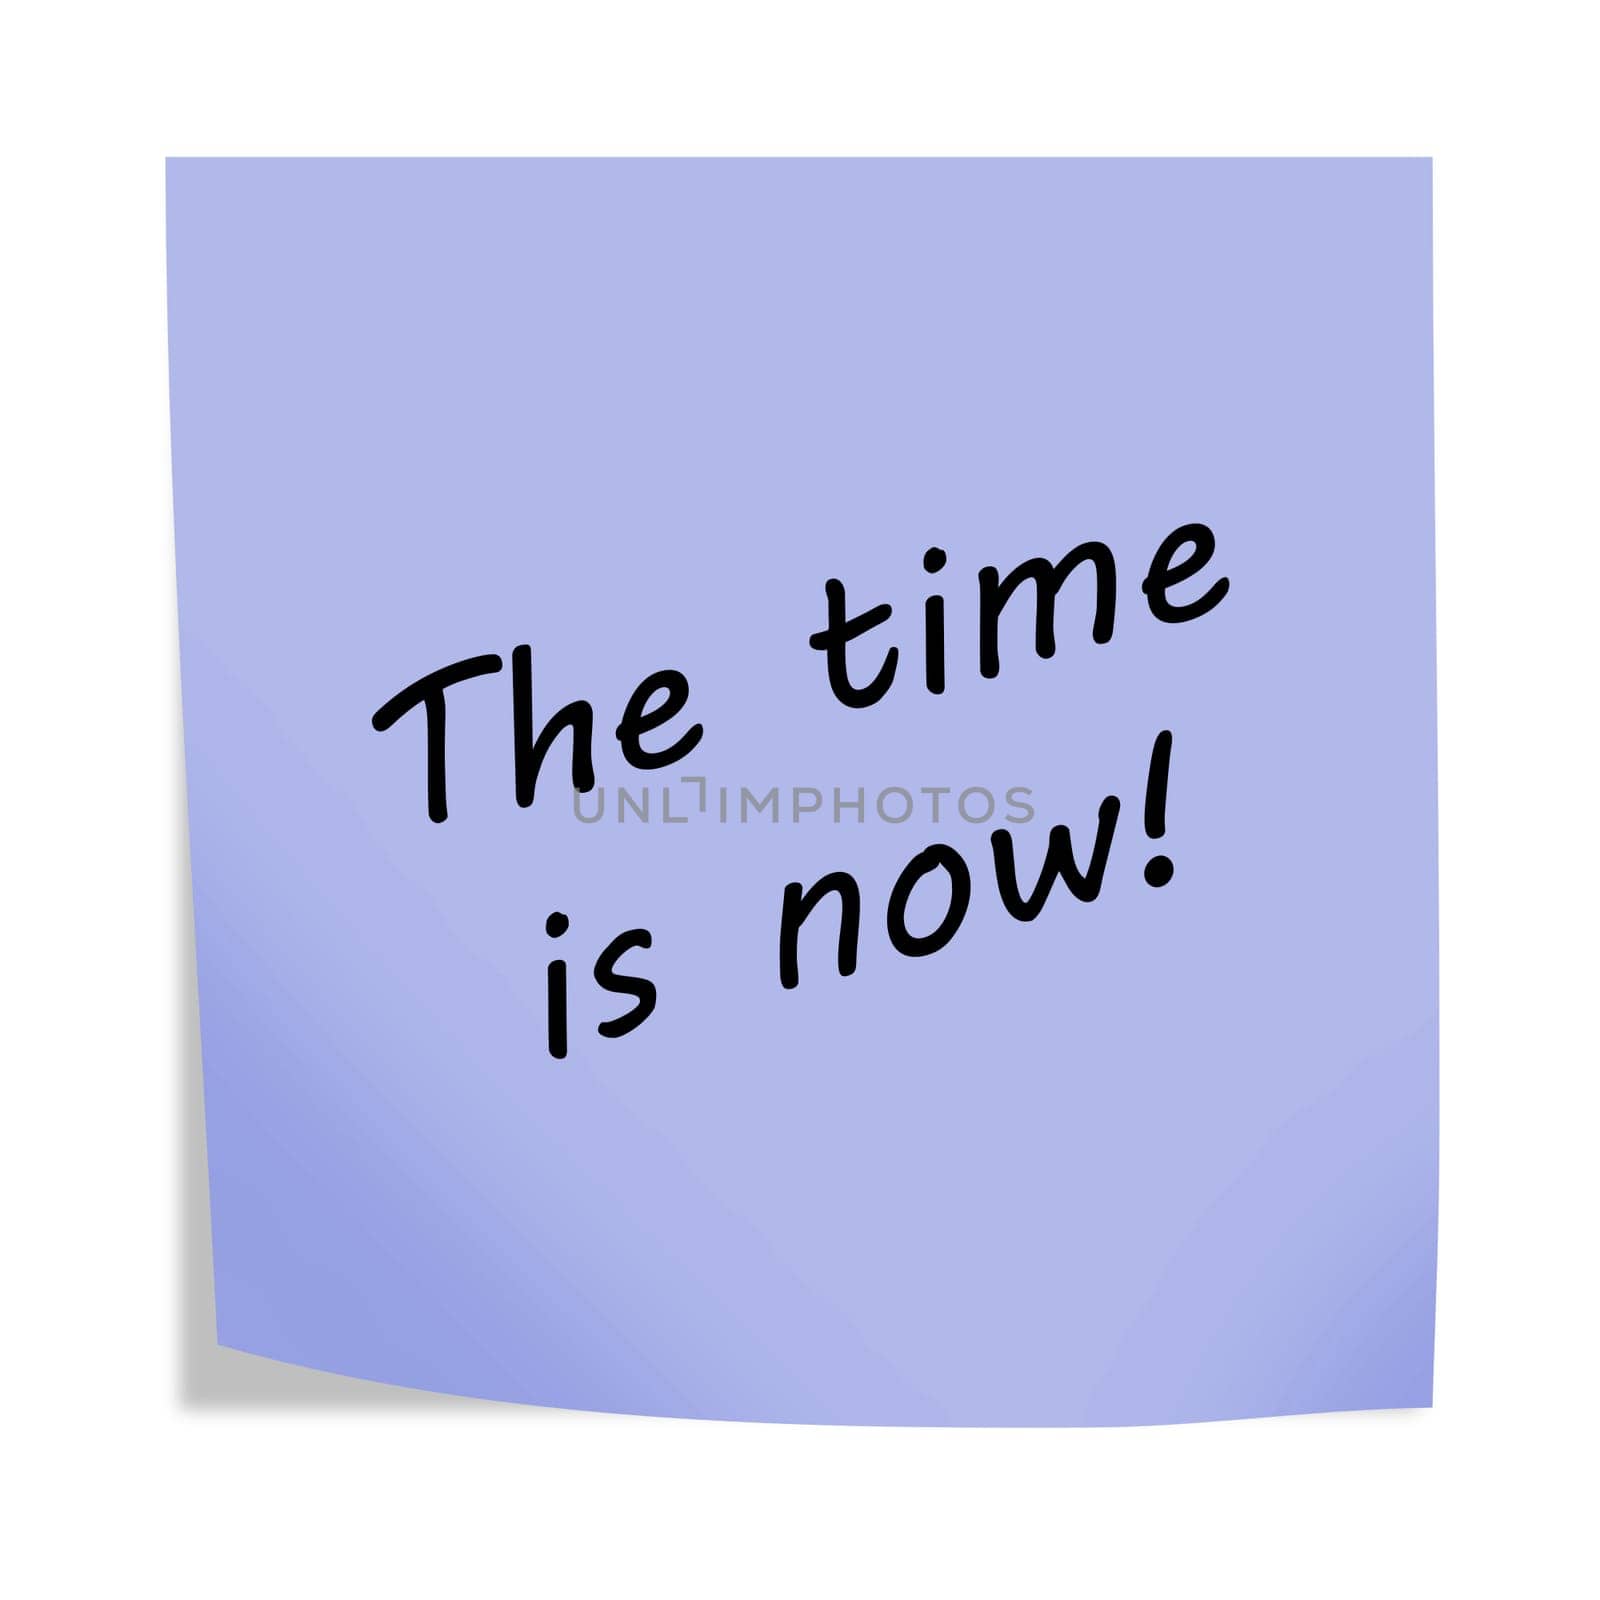 The time is now 3d illustration post note reminder on white with clipping path by VivacityImages